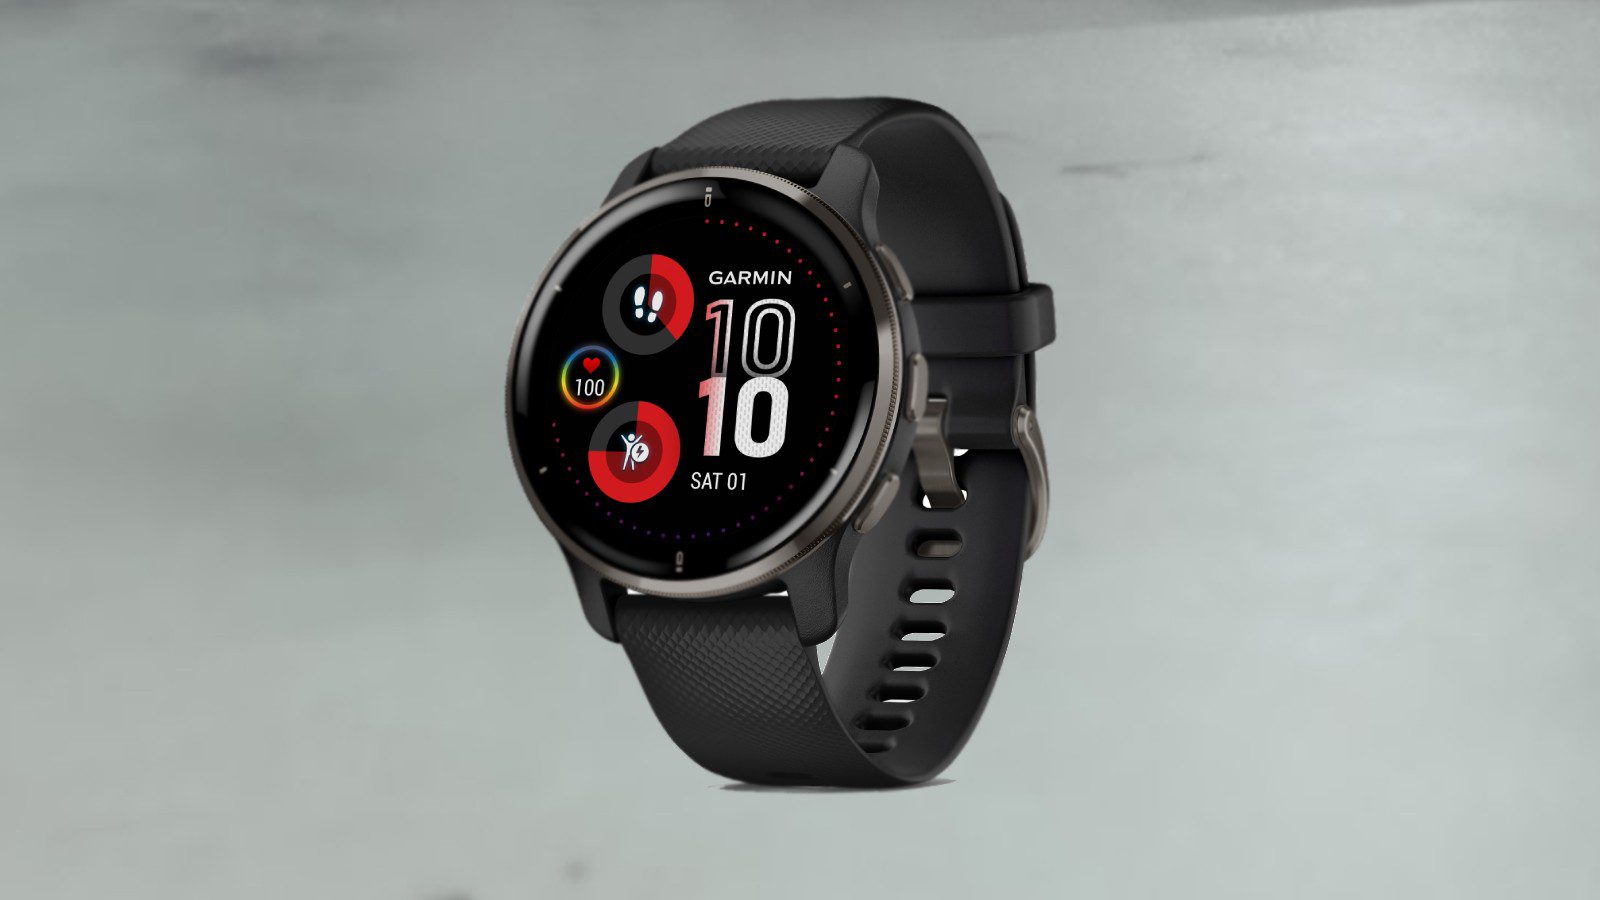 Garmin is up with first-ever smartwatch with voice control features